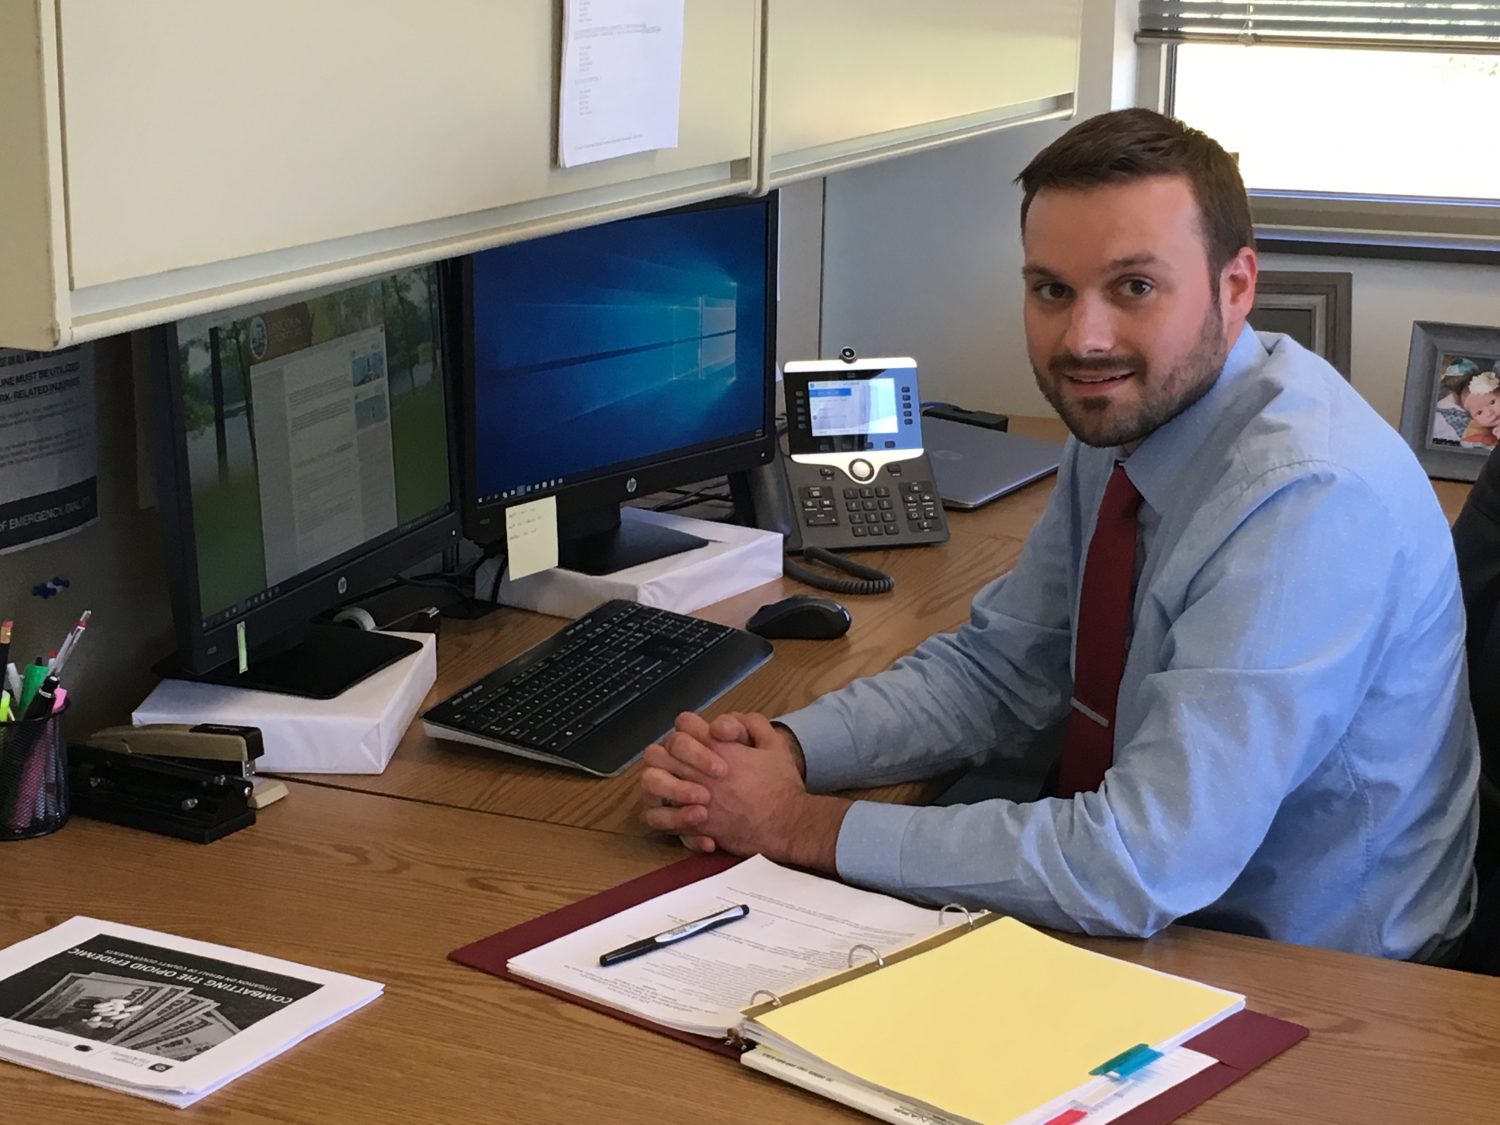 Hake settles in at Administrative Coordinator helm